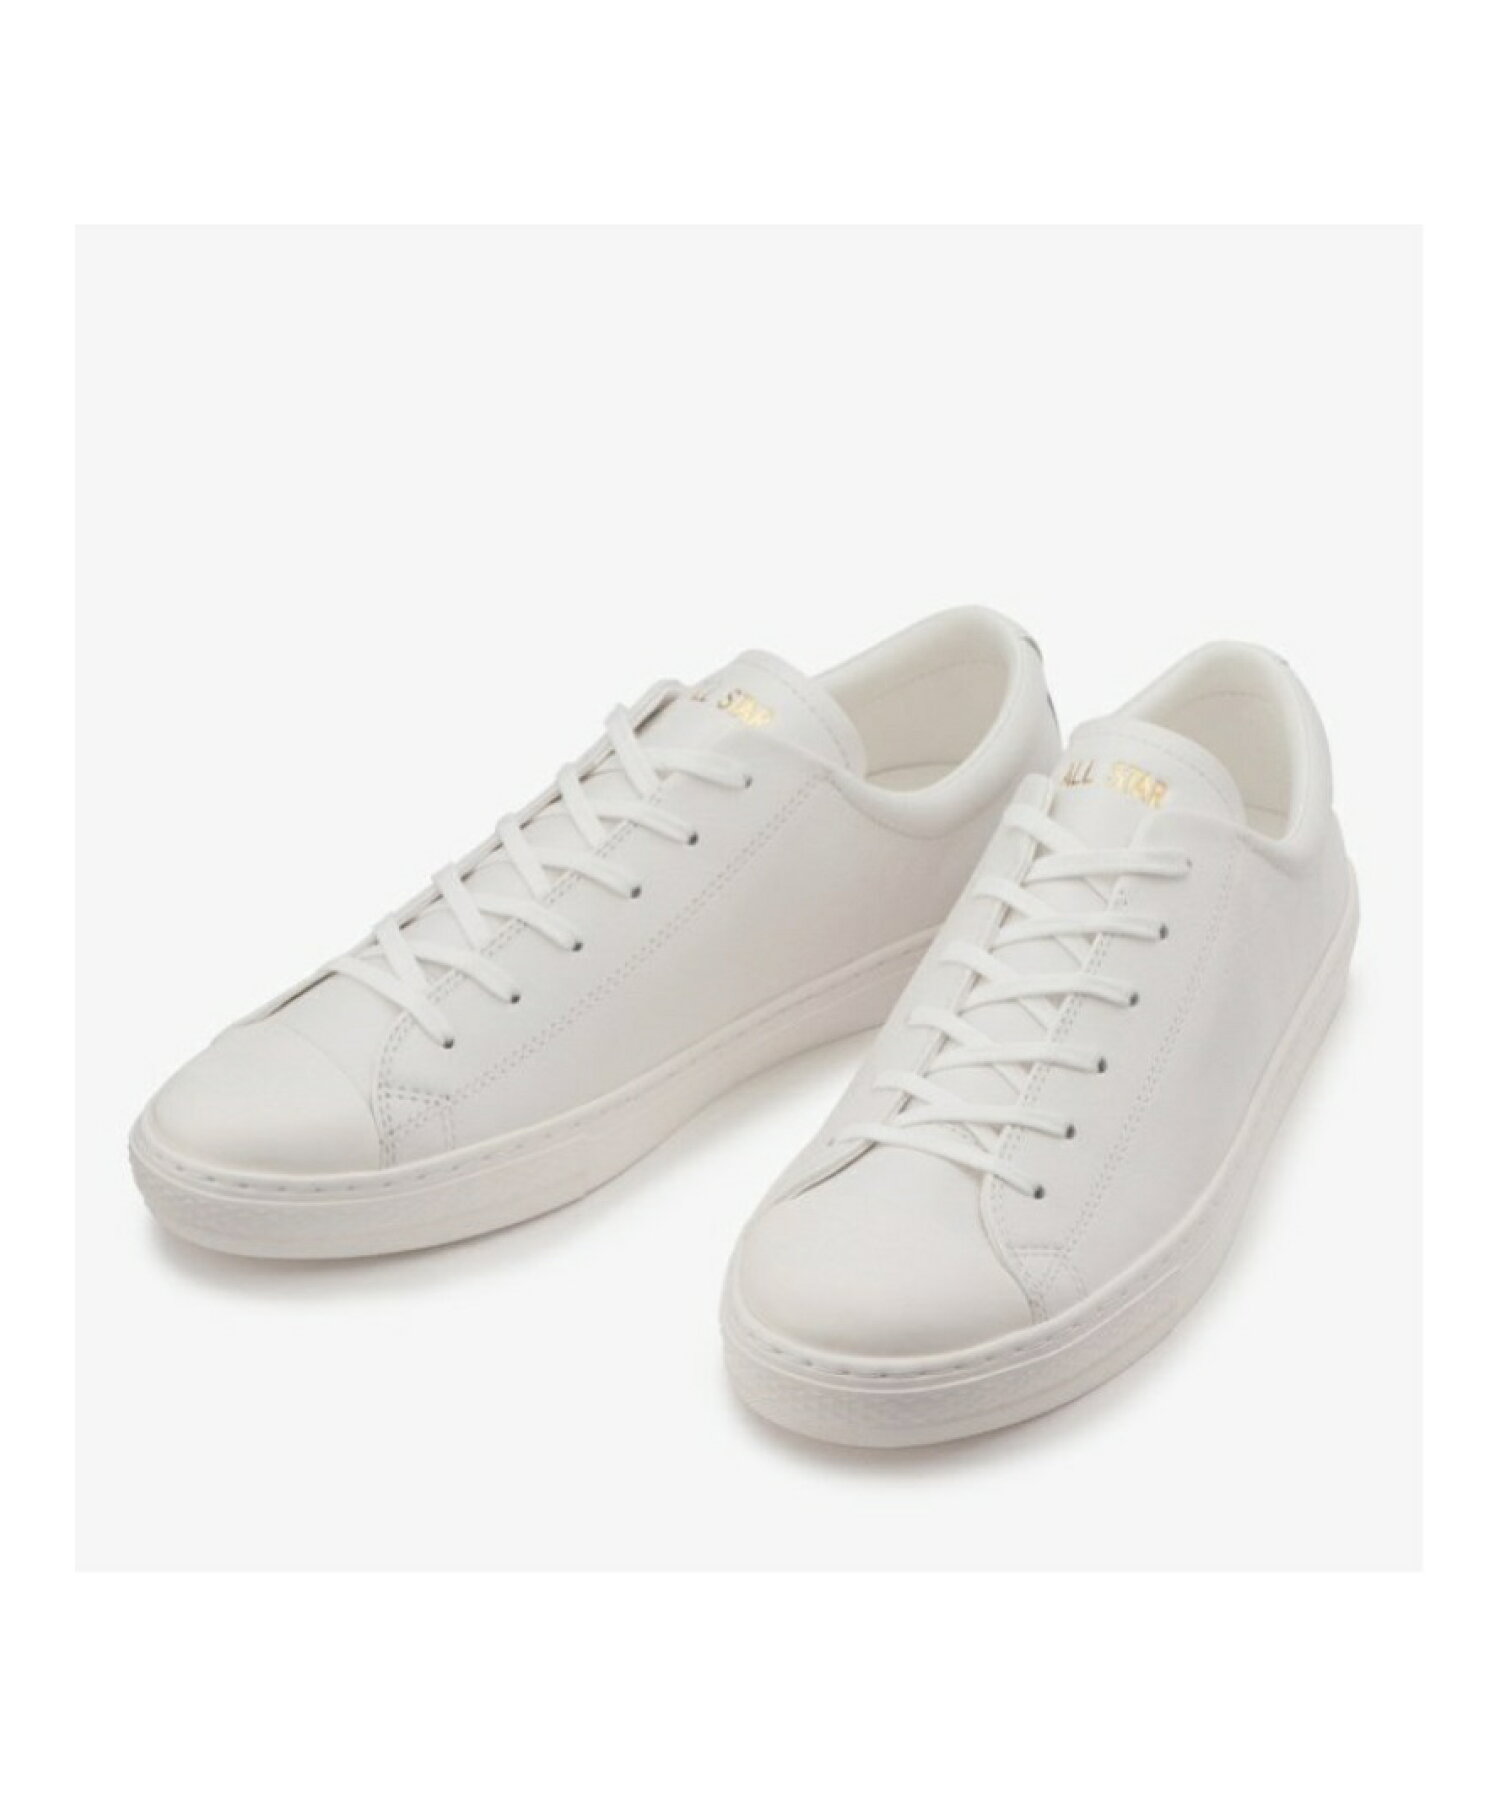 【CONVERSE 公式】LEATHER ALL STAR COUPE OX / 【コンバース 公式】レザー オールスター クップ OX